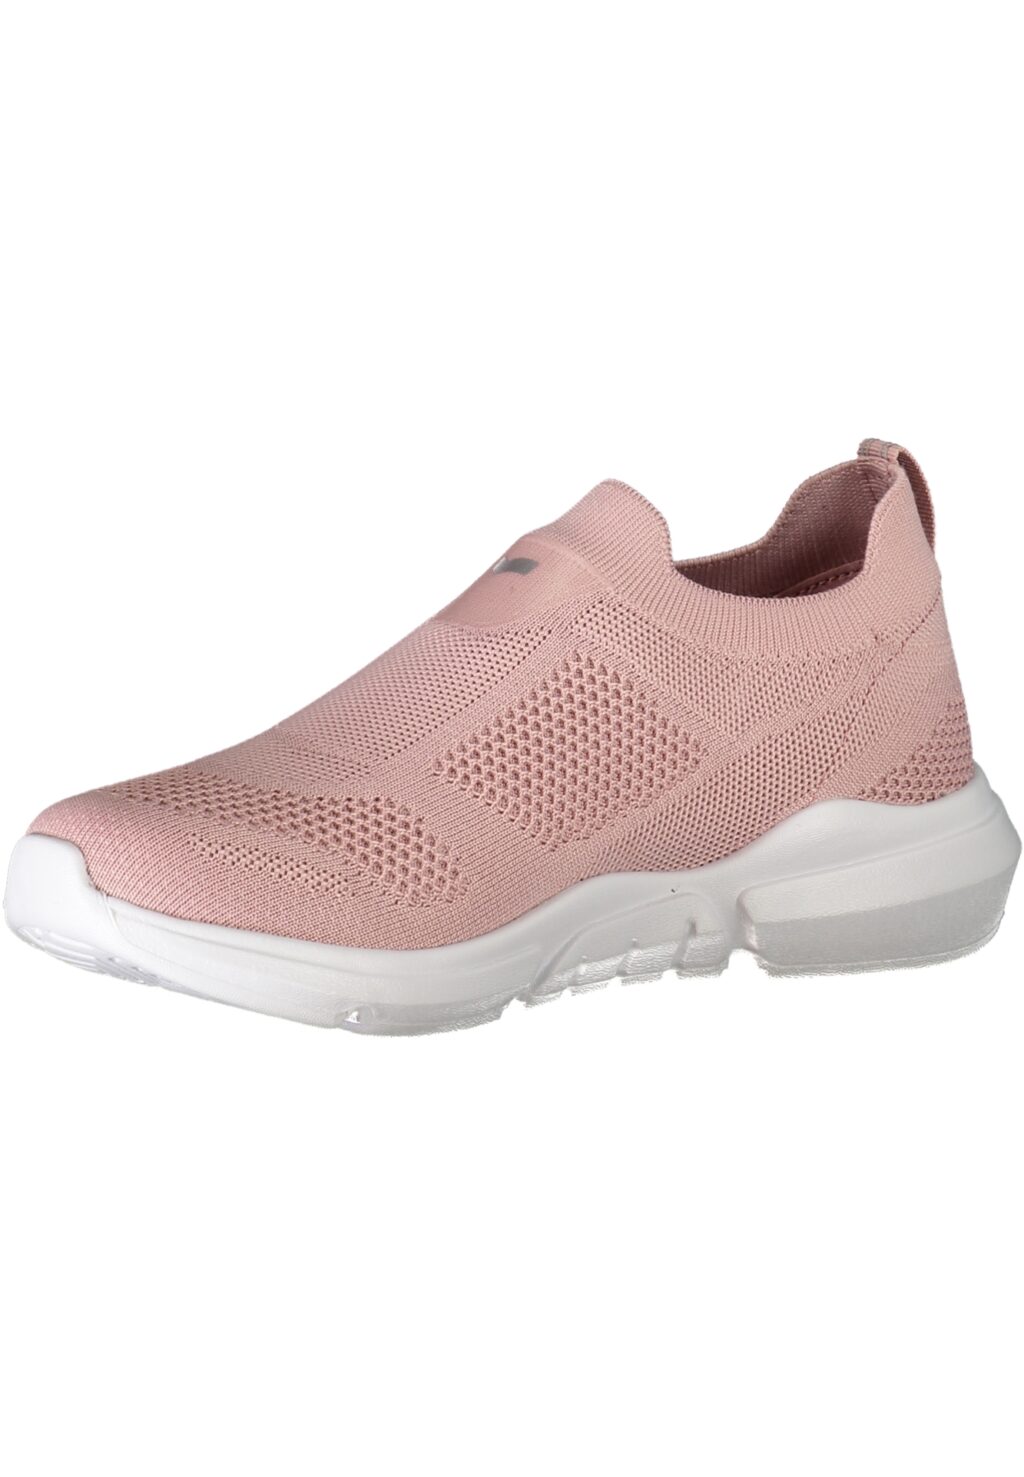 GAS PINK WOMEN'S SPORTS SHOES GAW417505_RS0044